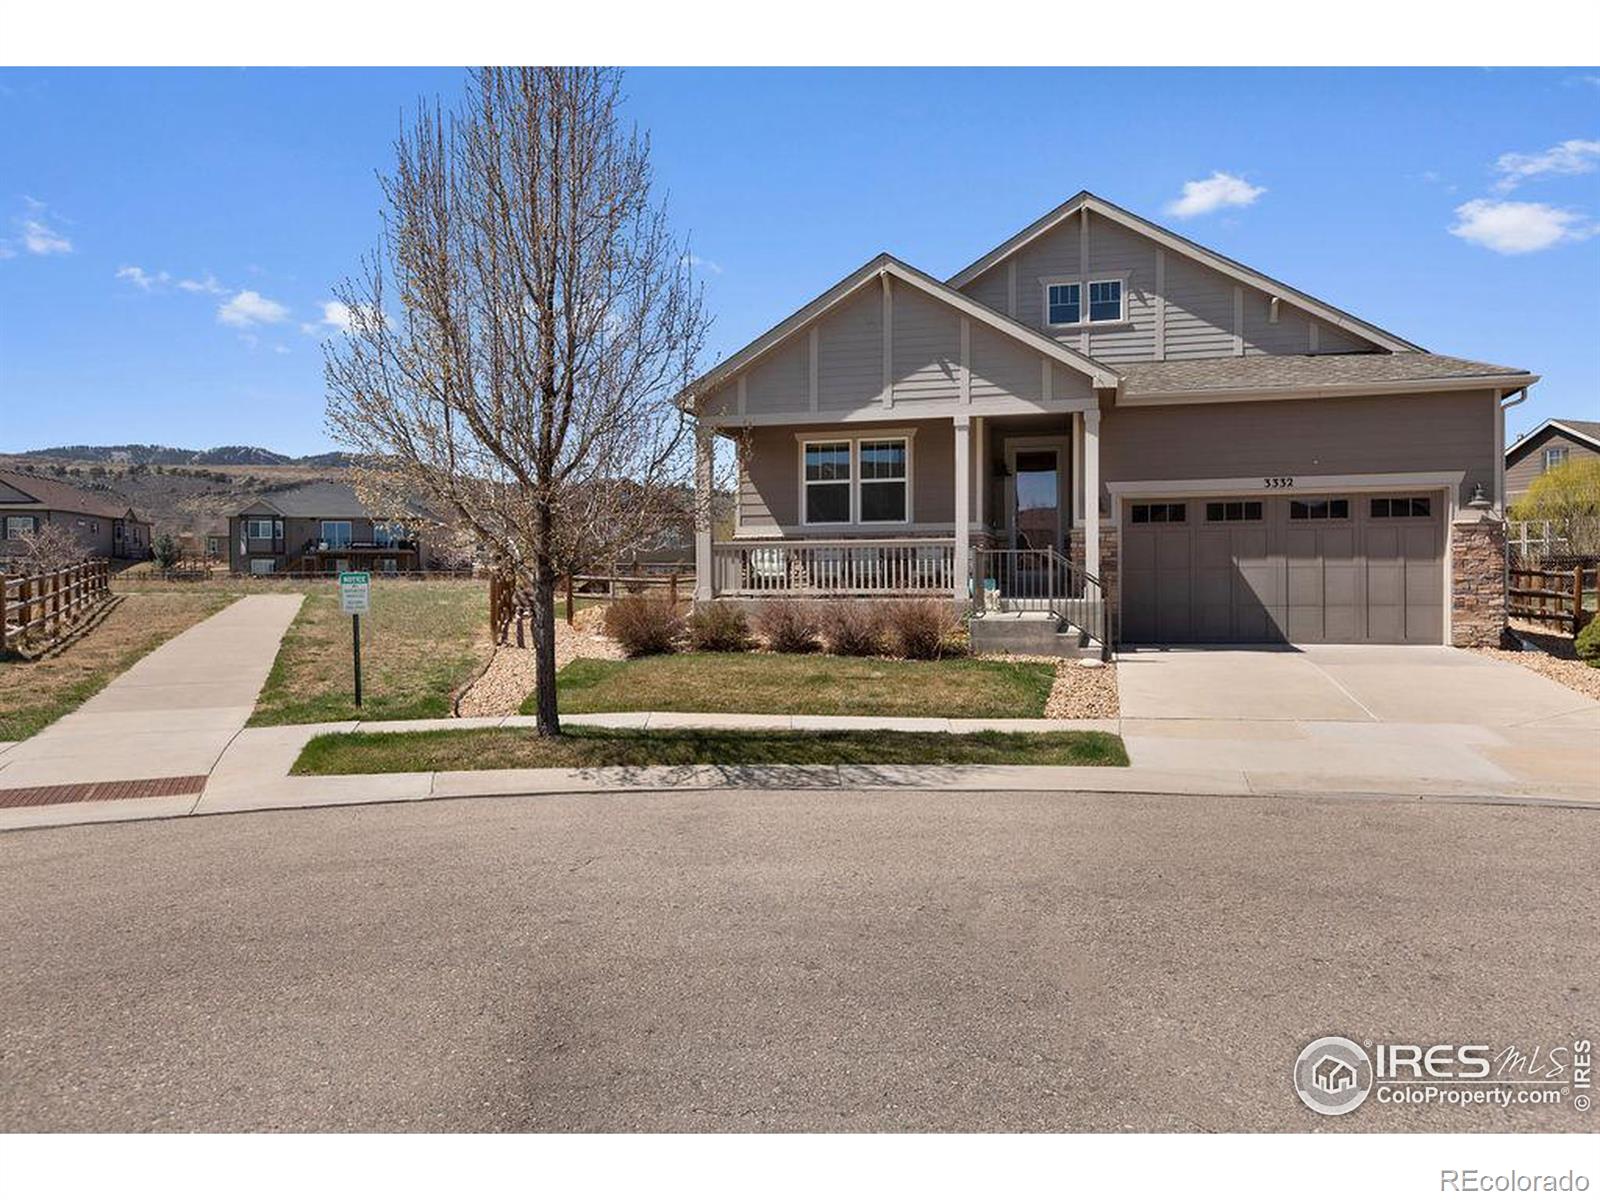 Report Image for 3332  Fiore Court,Fort Collins, Colorado